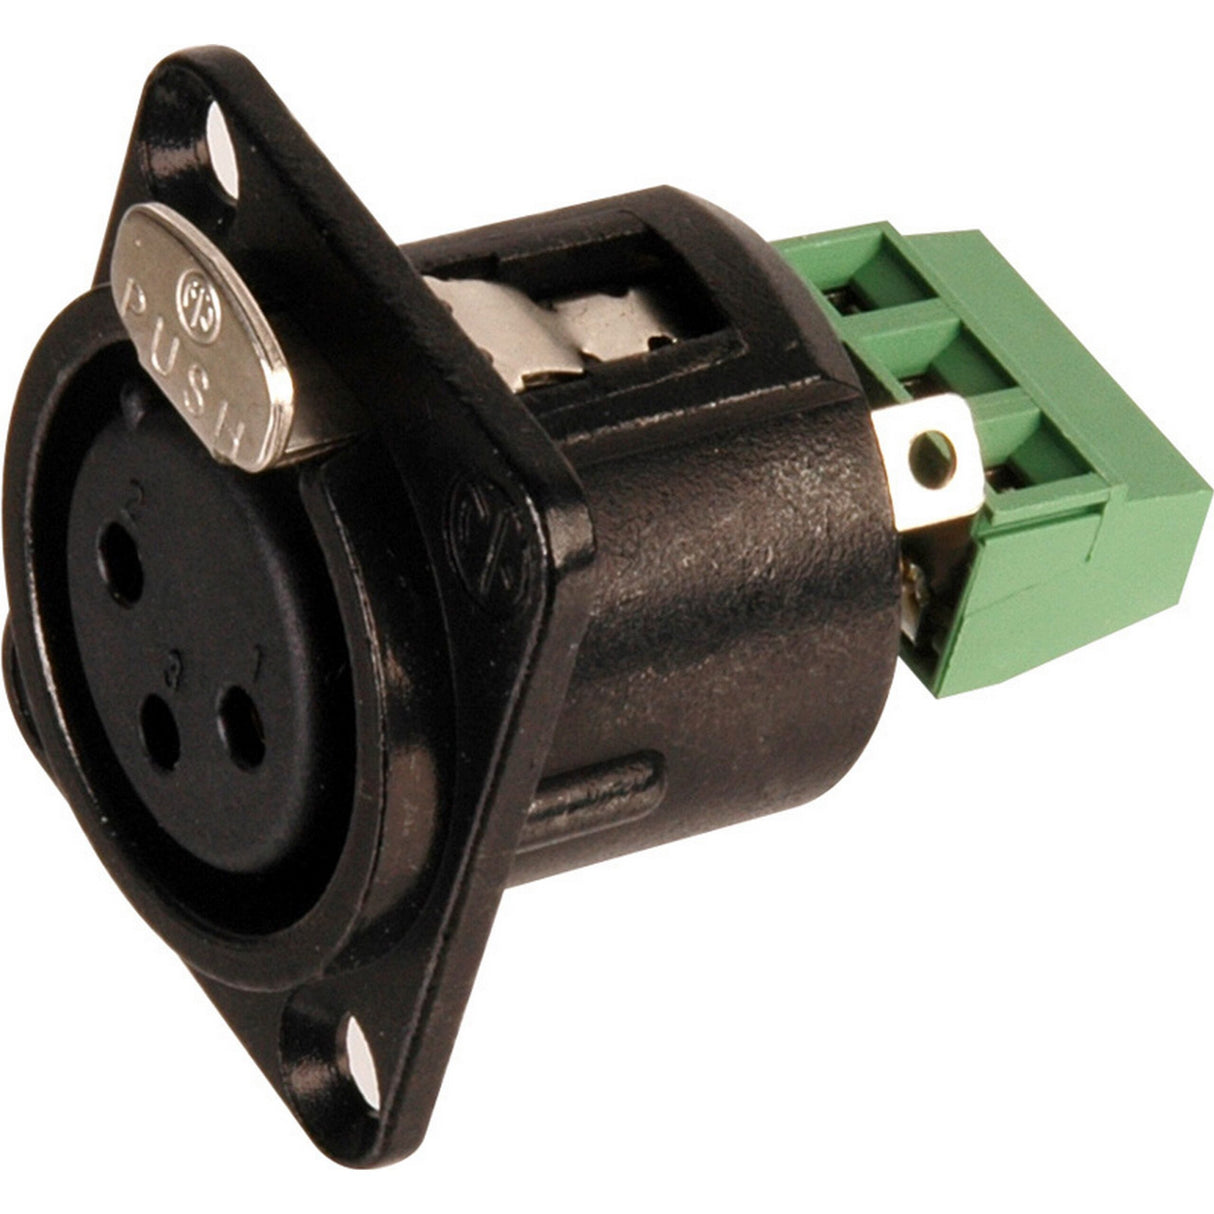 Neutrik NC3FD-SCREW 3-Pin Female XLR Panel/Chassis Mount Connector with Rear Screw Terminals